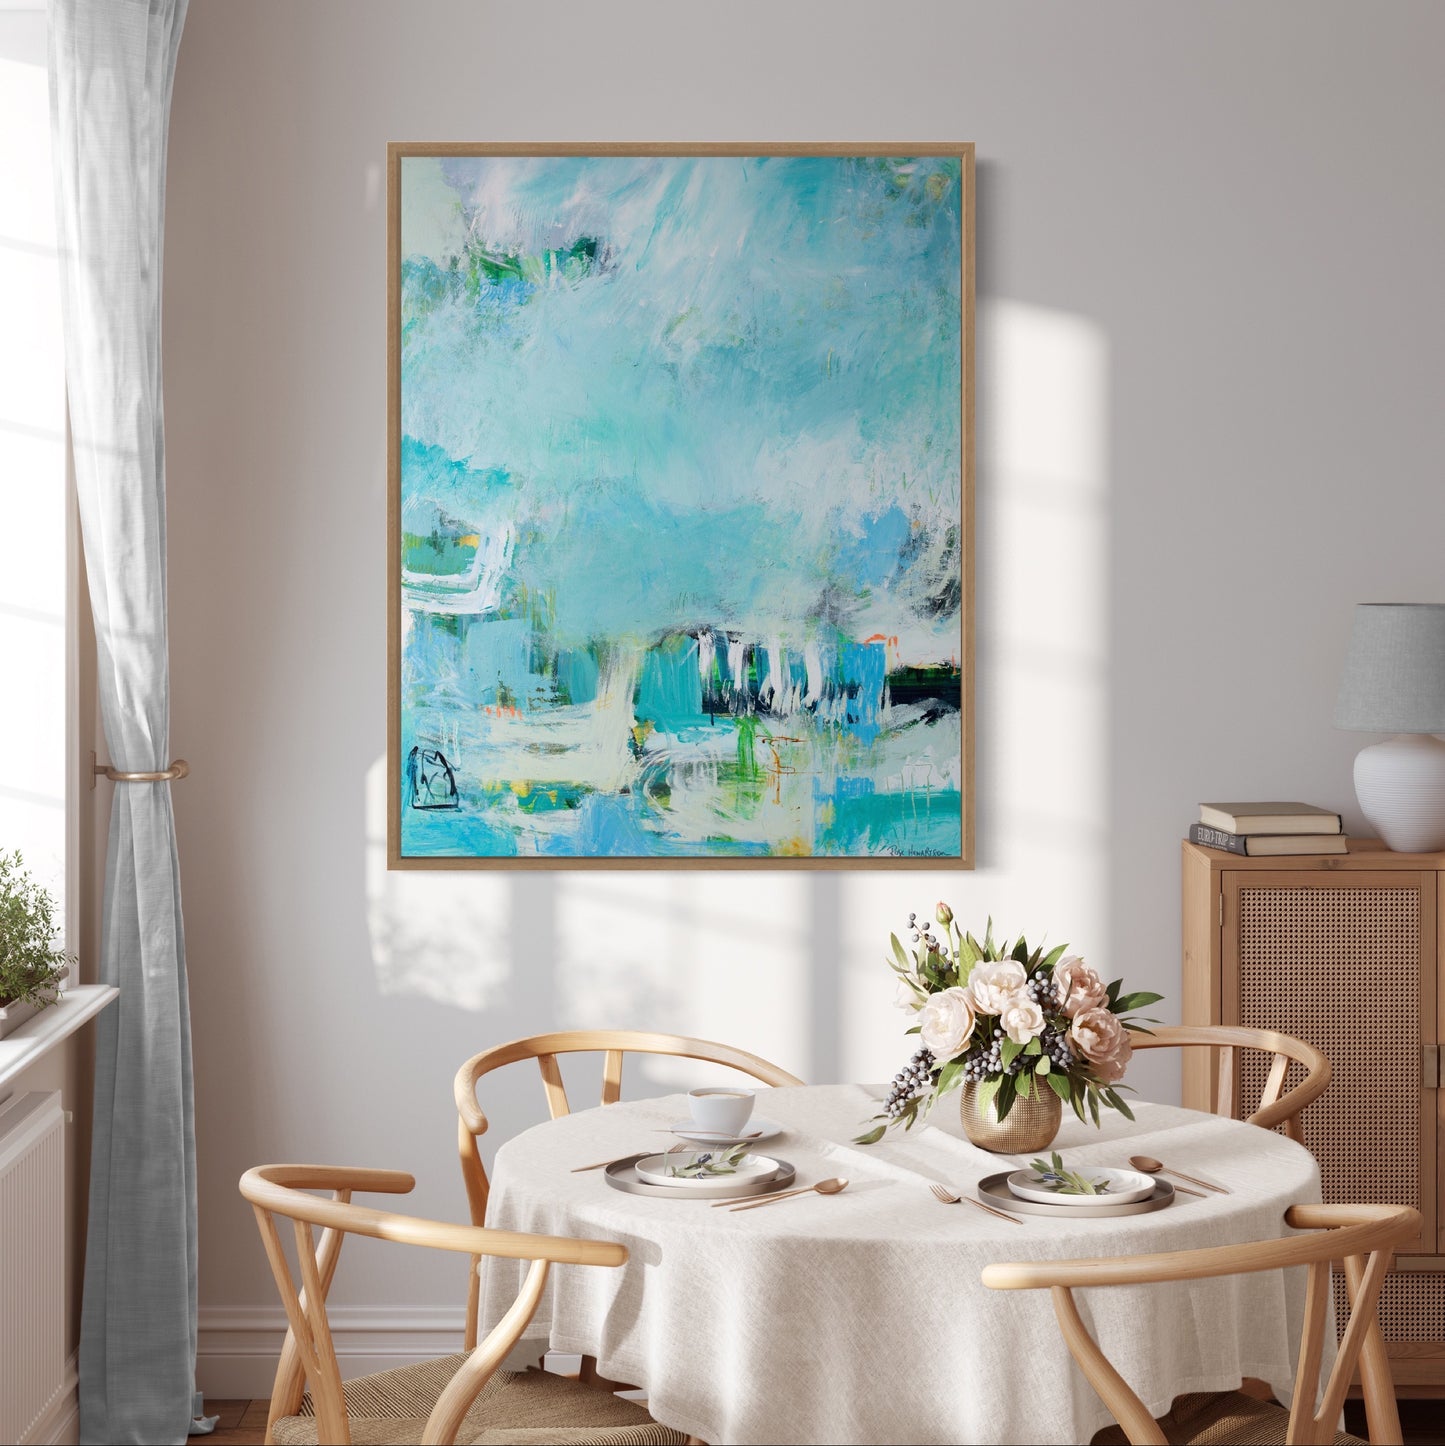 Wild & Precious- by Australian Artist Rose Hewartson Original Abstract Painting on Canvas Framed 99 x 123cm